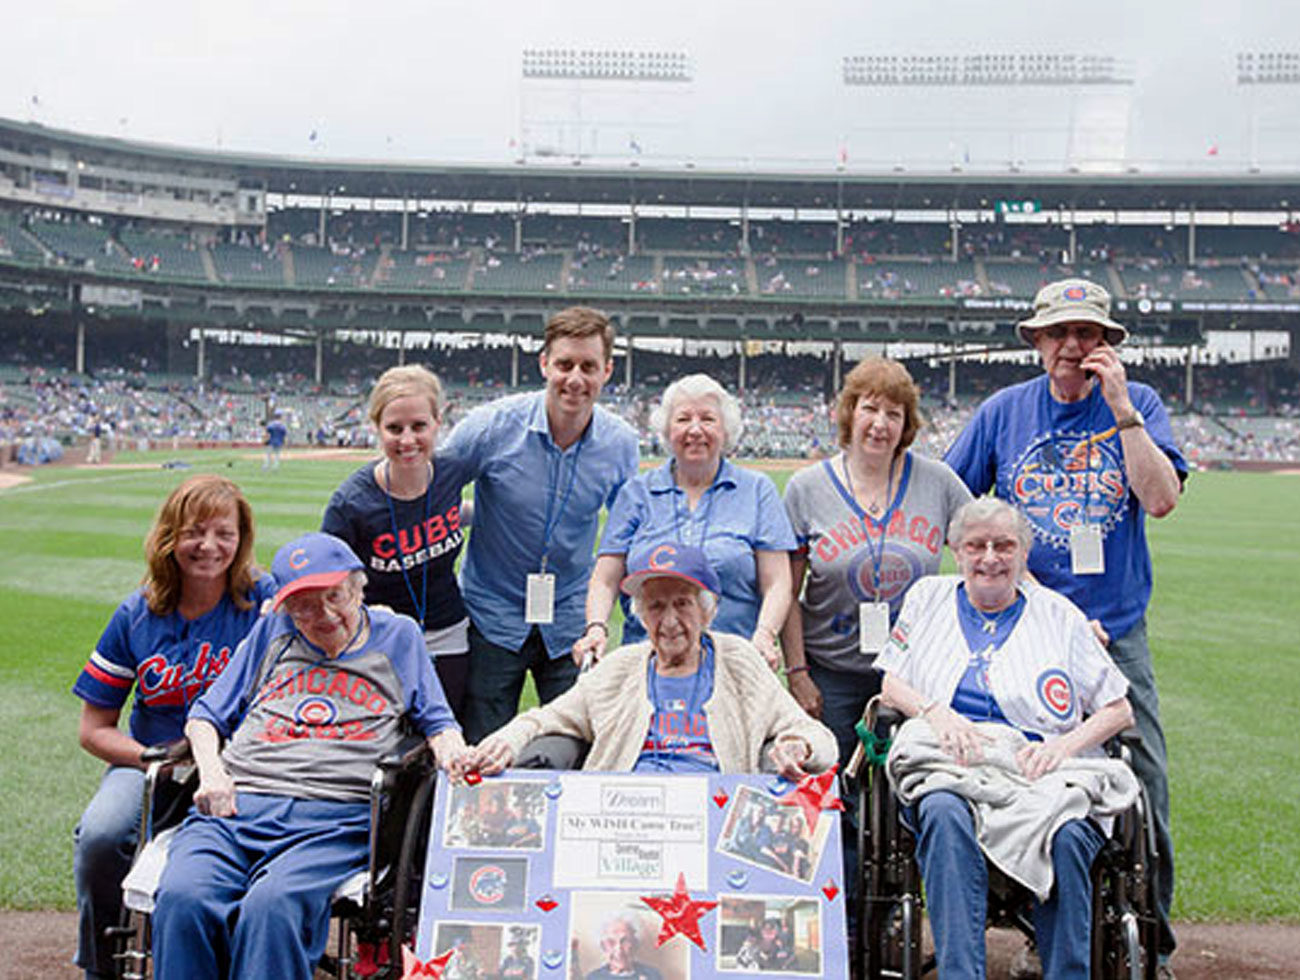 CBV residents joining Louise Sauer at a Cubs game